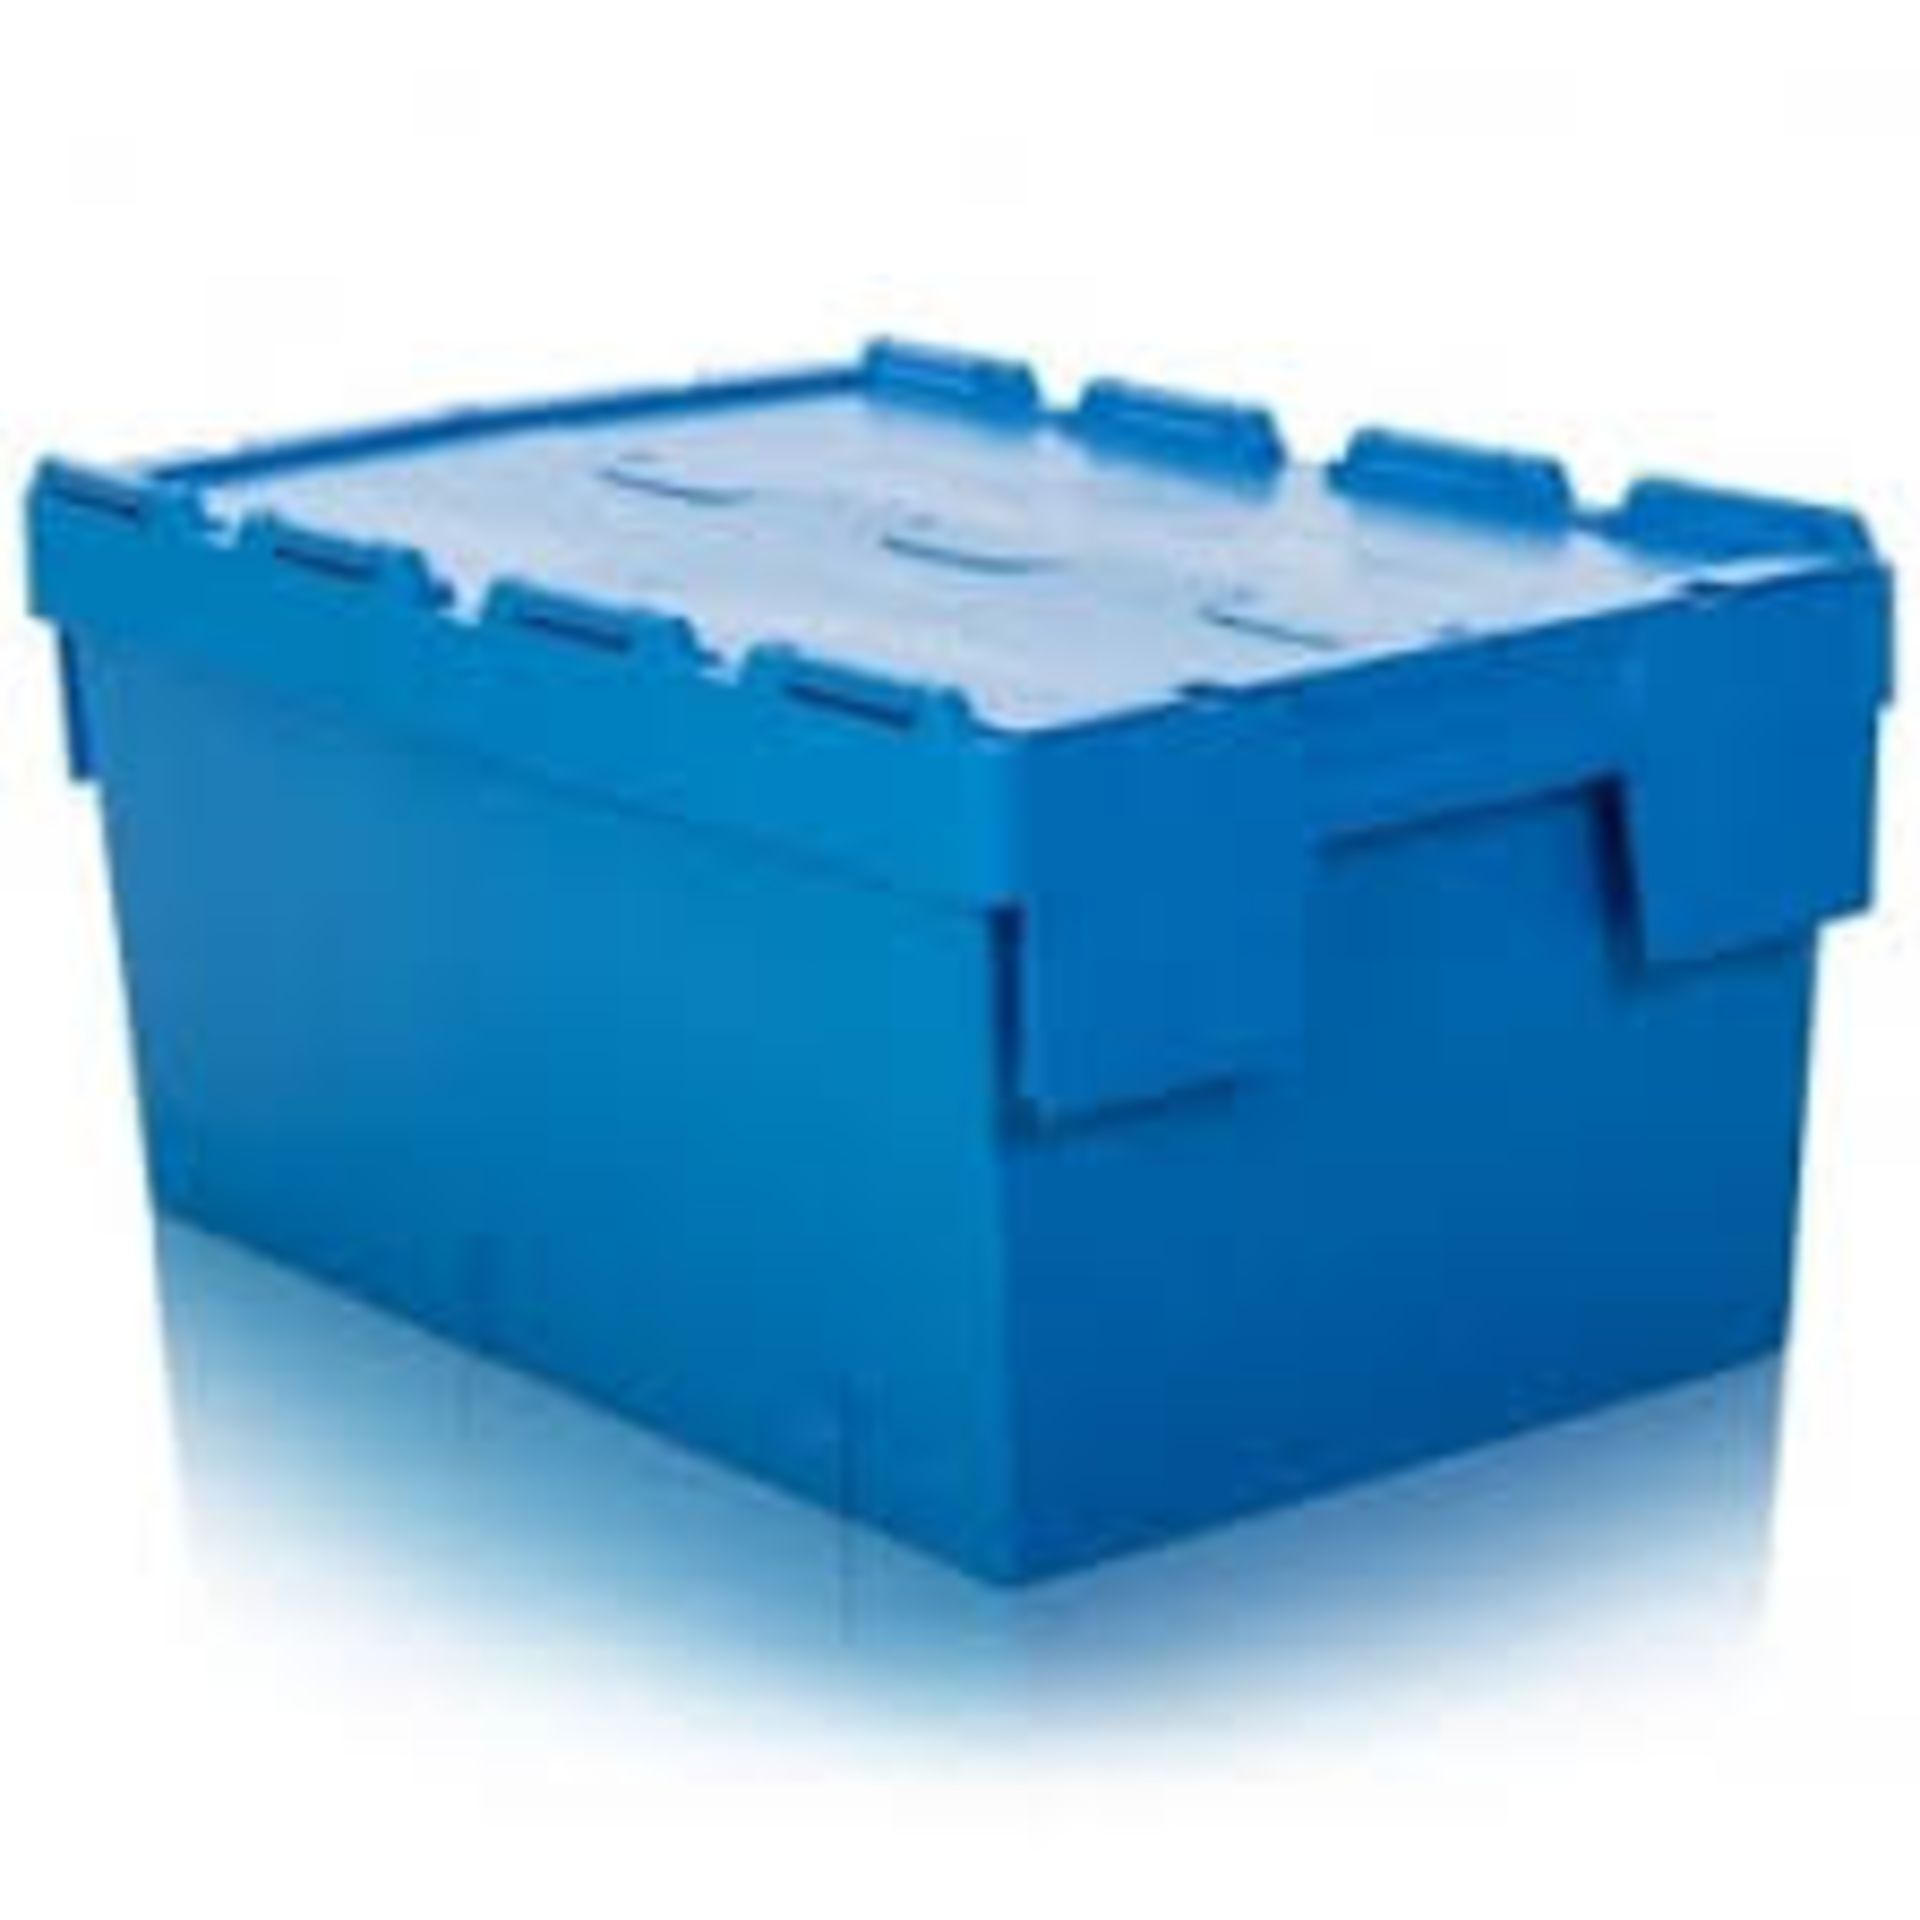 Rrp £150 Lot To Contain 10 Blue Tote Boxes With Attached Lid